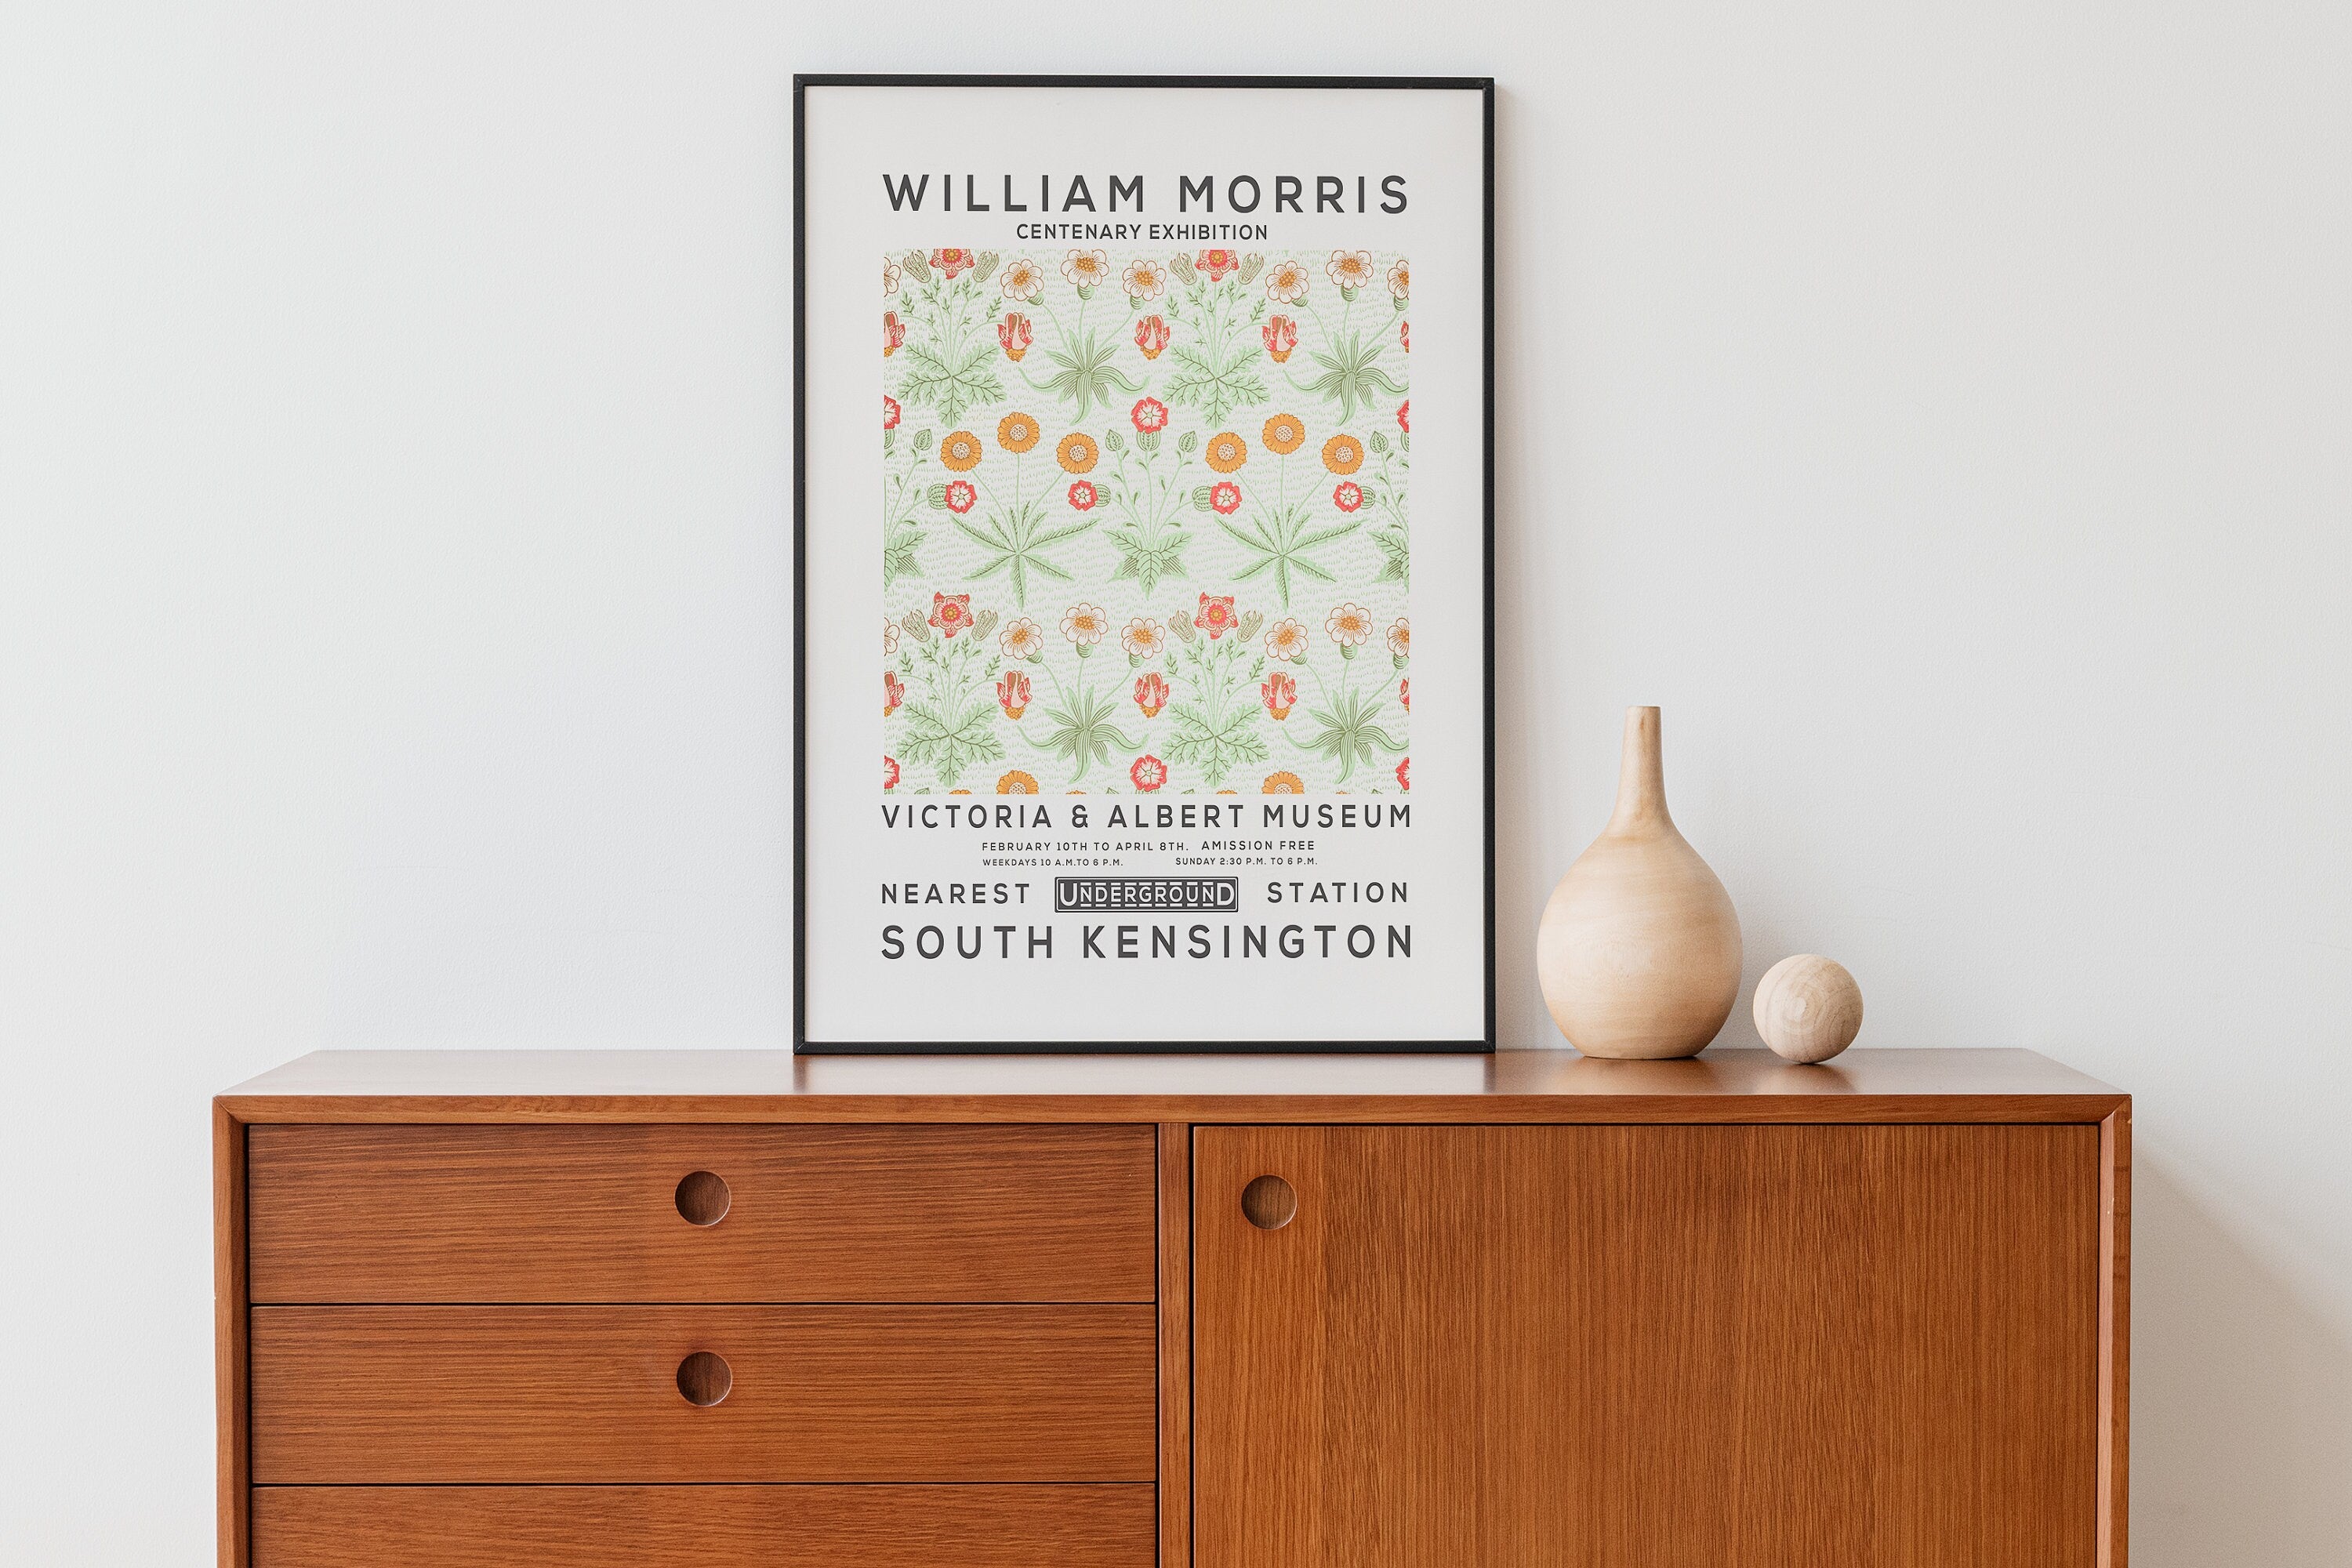 William Morris Print, Vintage Wall Decor, Exhibition Poster, Floral Wall Art, Flower Print, Home Decor, Daisy Pattern